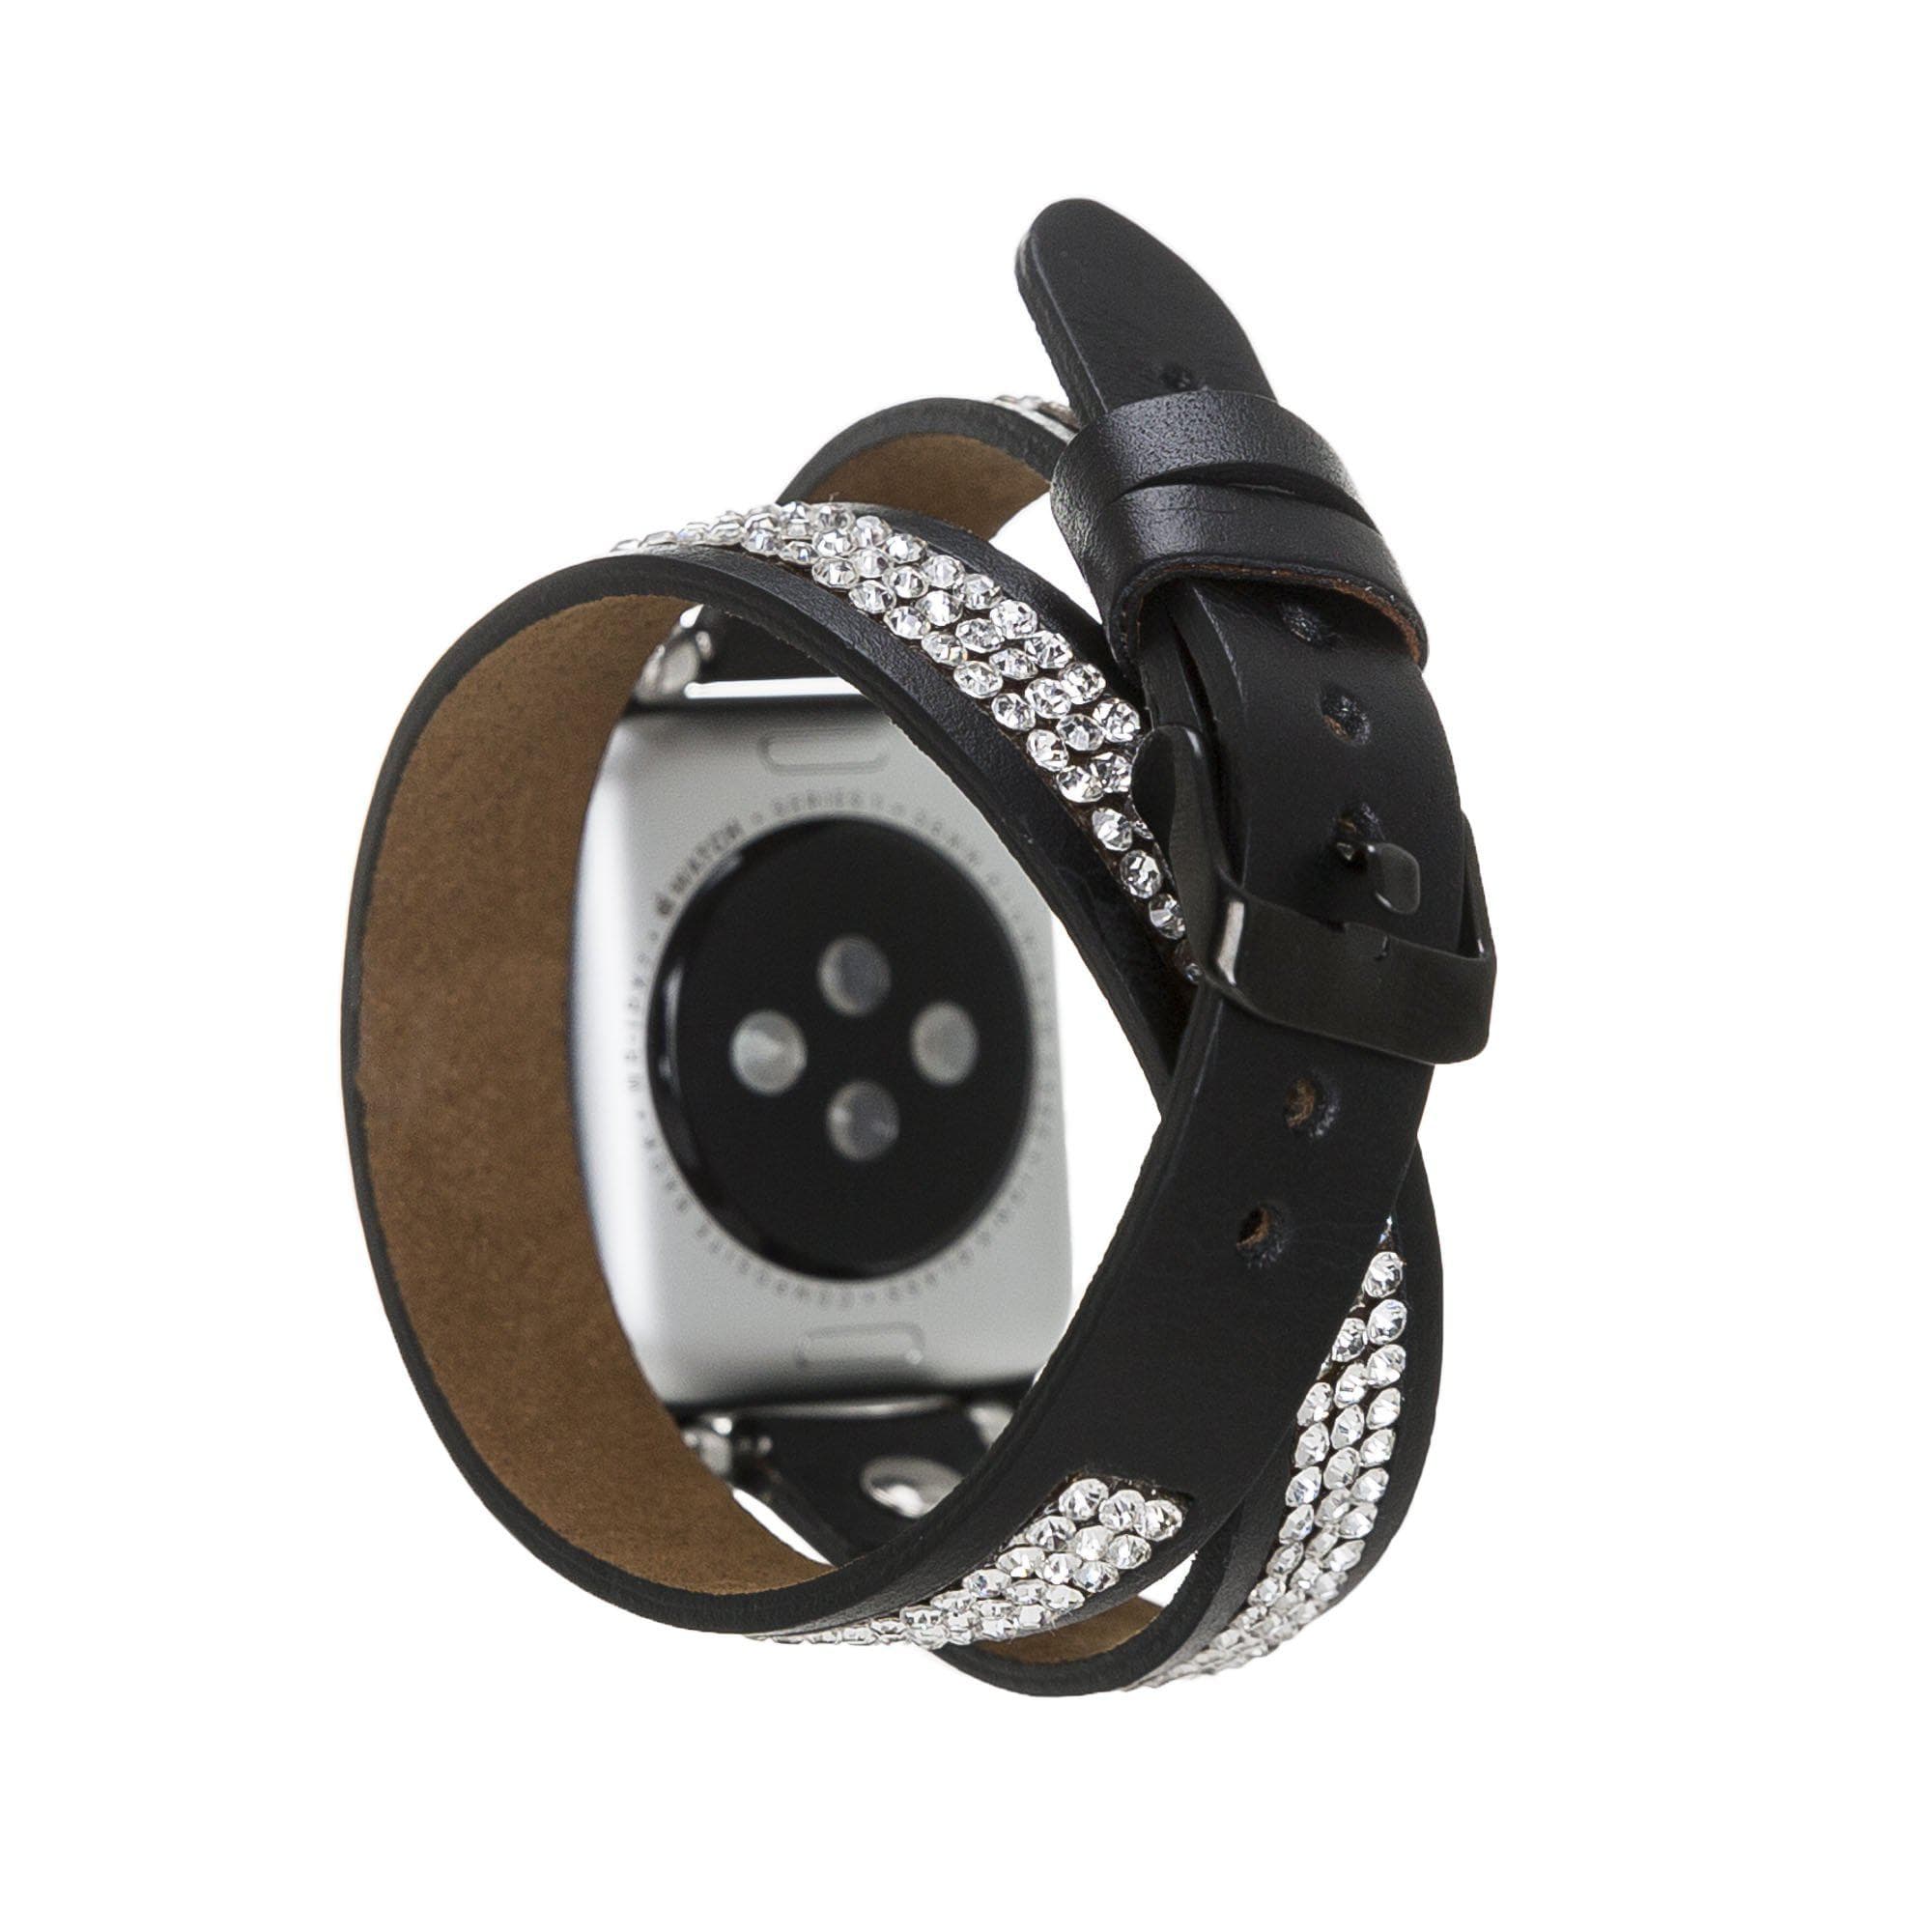 B2B - Leather Apple Watch Bands - Crystal Ferro Double Tour Style RST1 Bouletta B2B